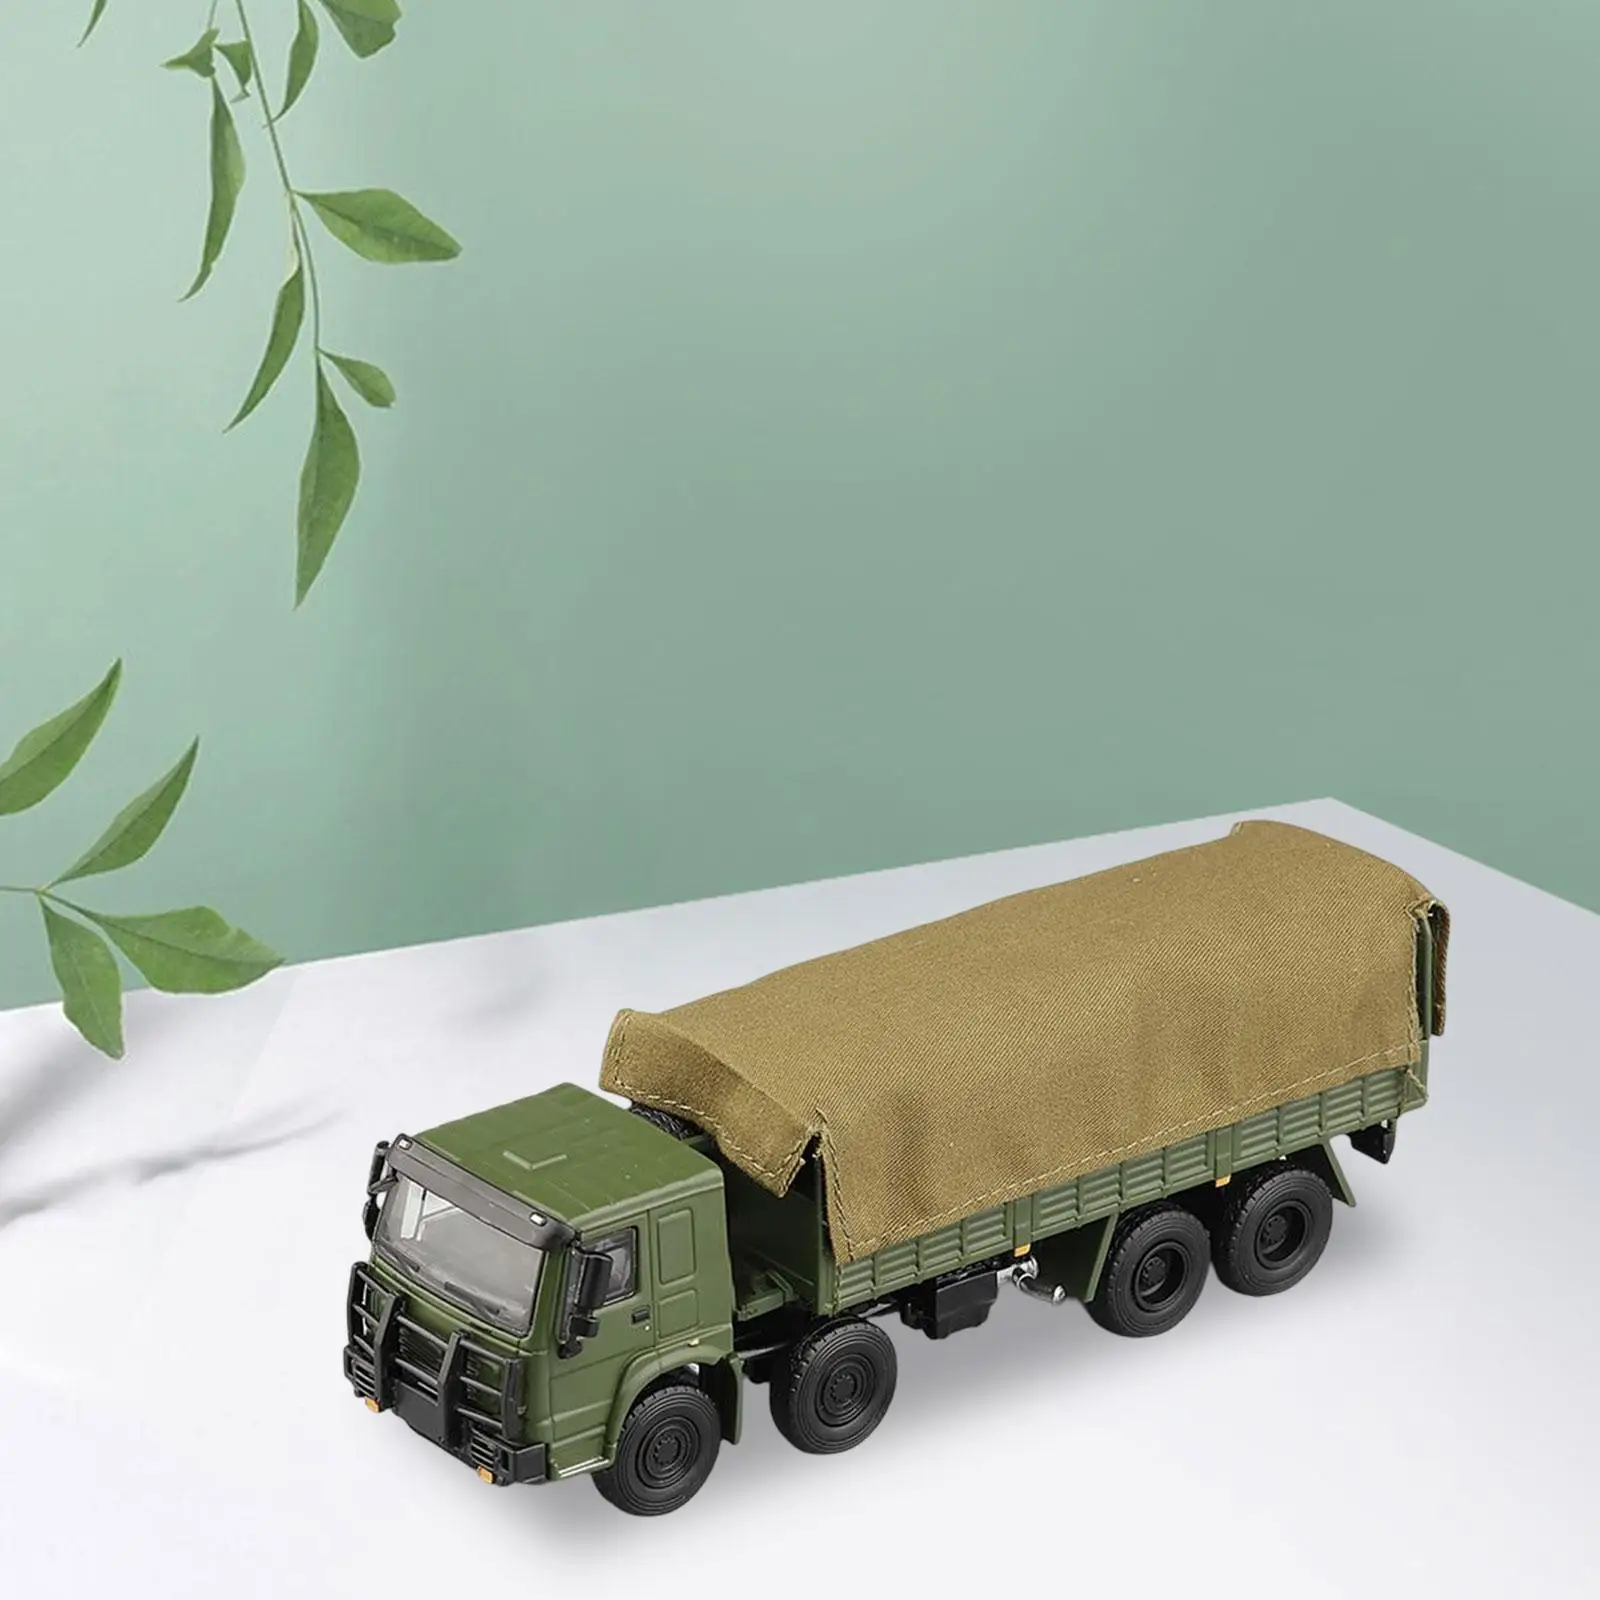 1/64 Transport Truck Diorama Scenes Adults Gifts Mini Vehicles Toys for Diorama Photography Props Miniature Scene Layout Decor